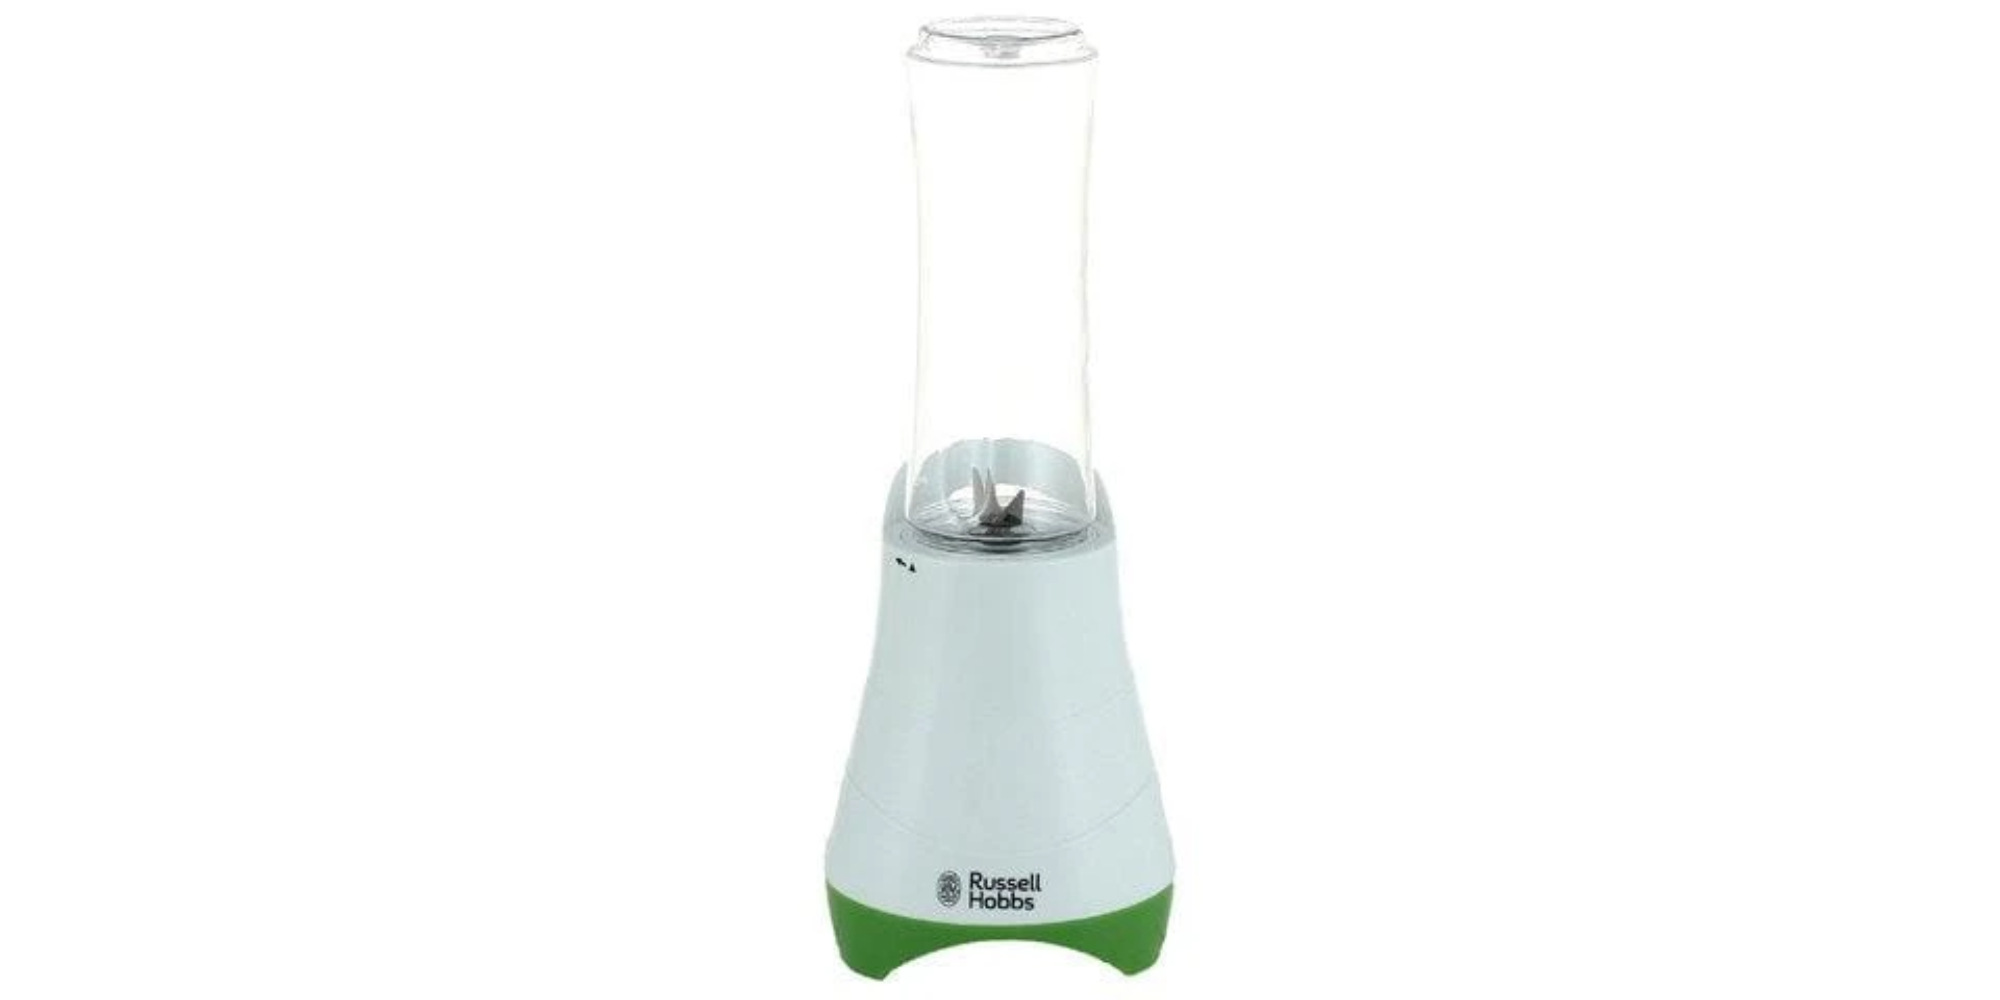 RUSSELL HOBBS 21350 SMOOTHIE MAKER